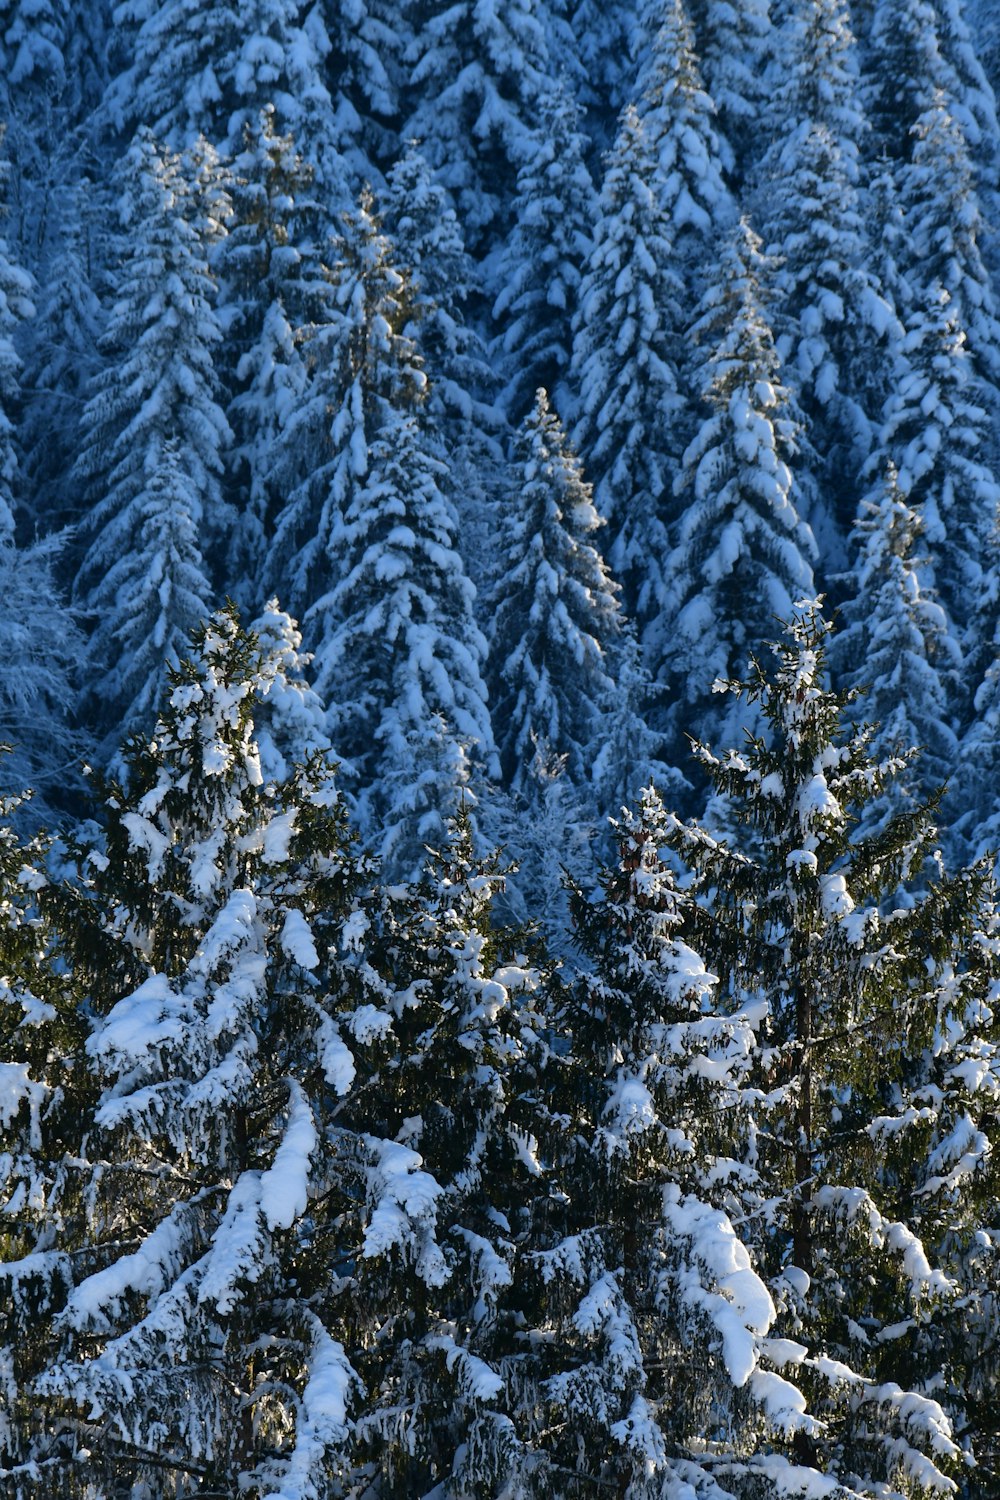 a snowboarder is in the middle of a snowy forest